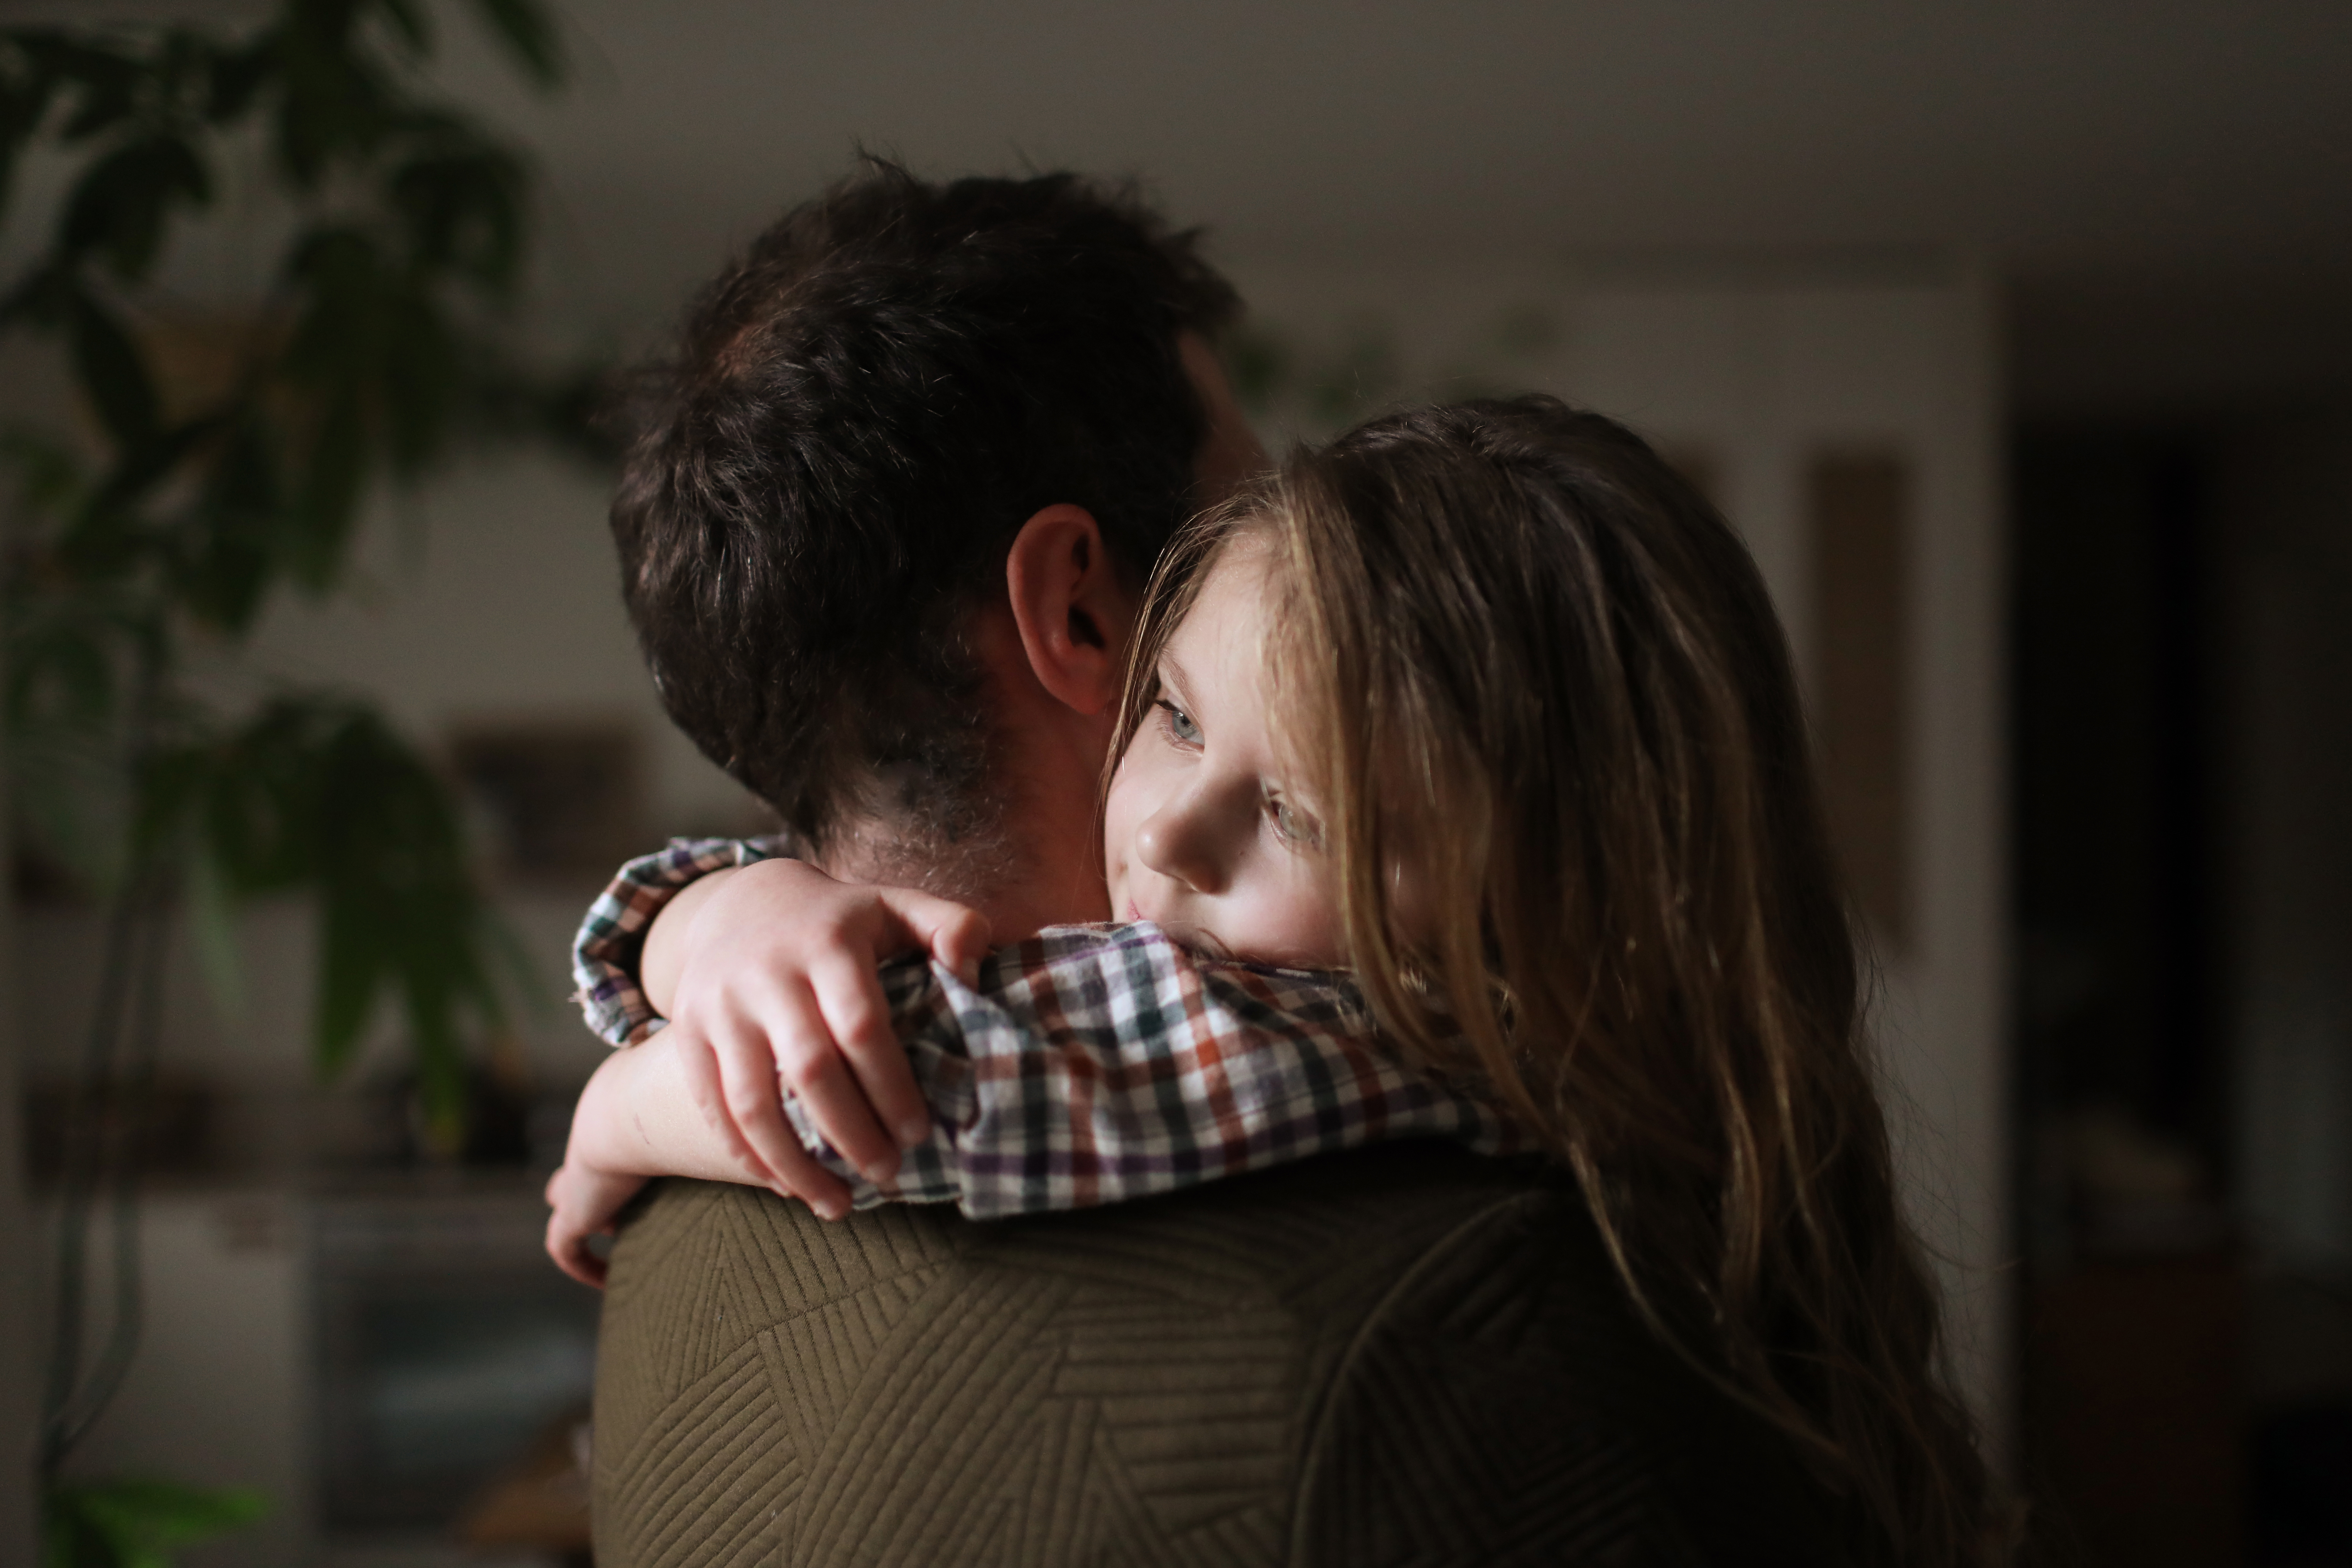 A father and his daughter cuddling at home | Source: Getty Images